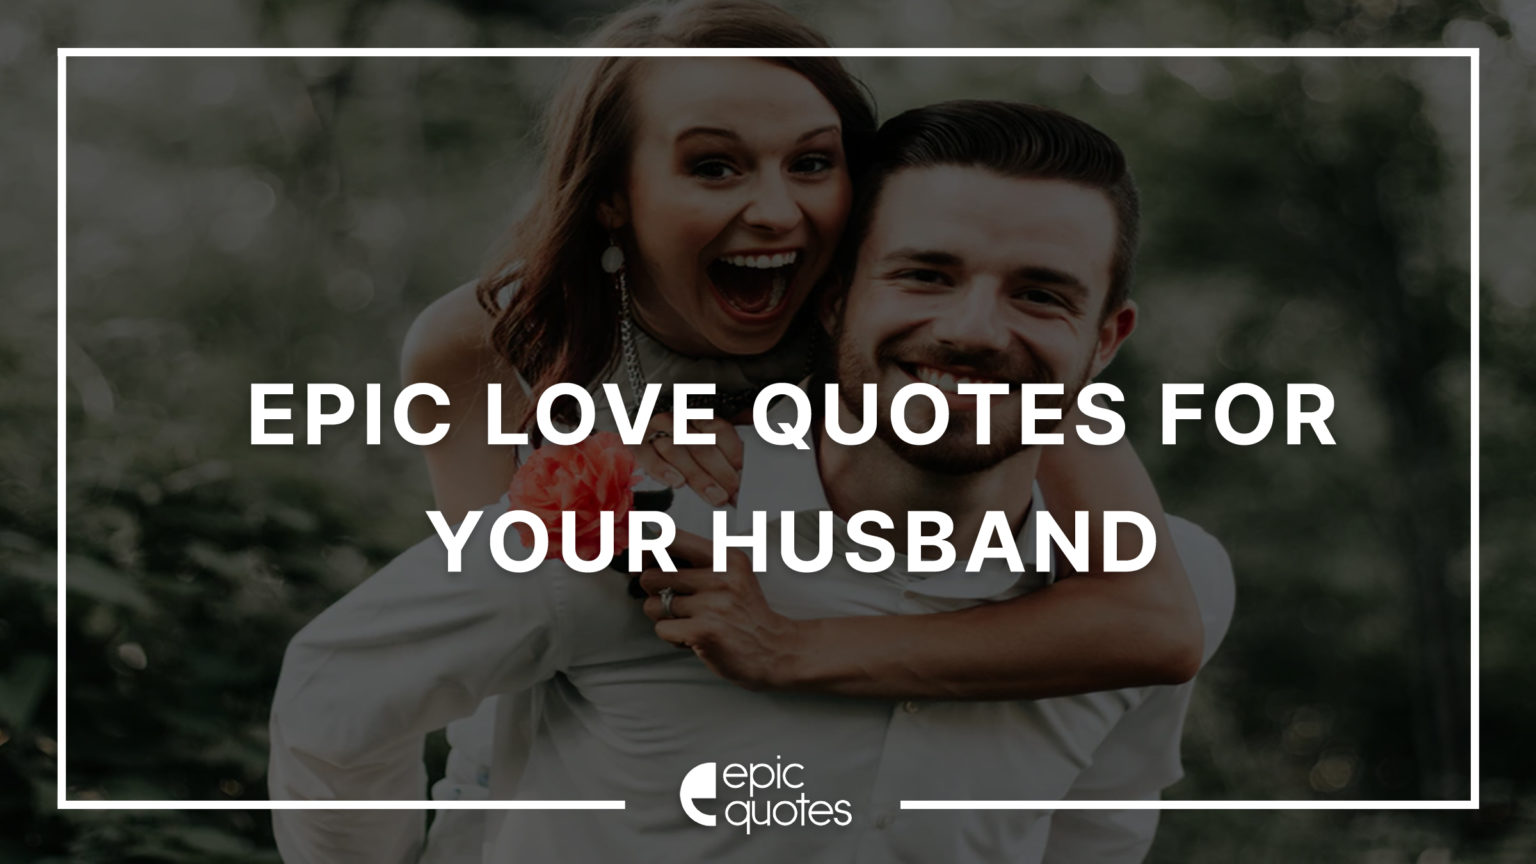 Epic Love Quotes For Your Husband